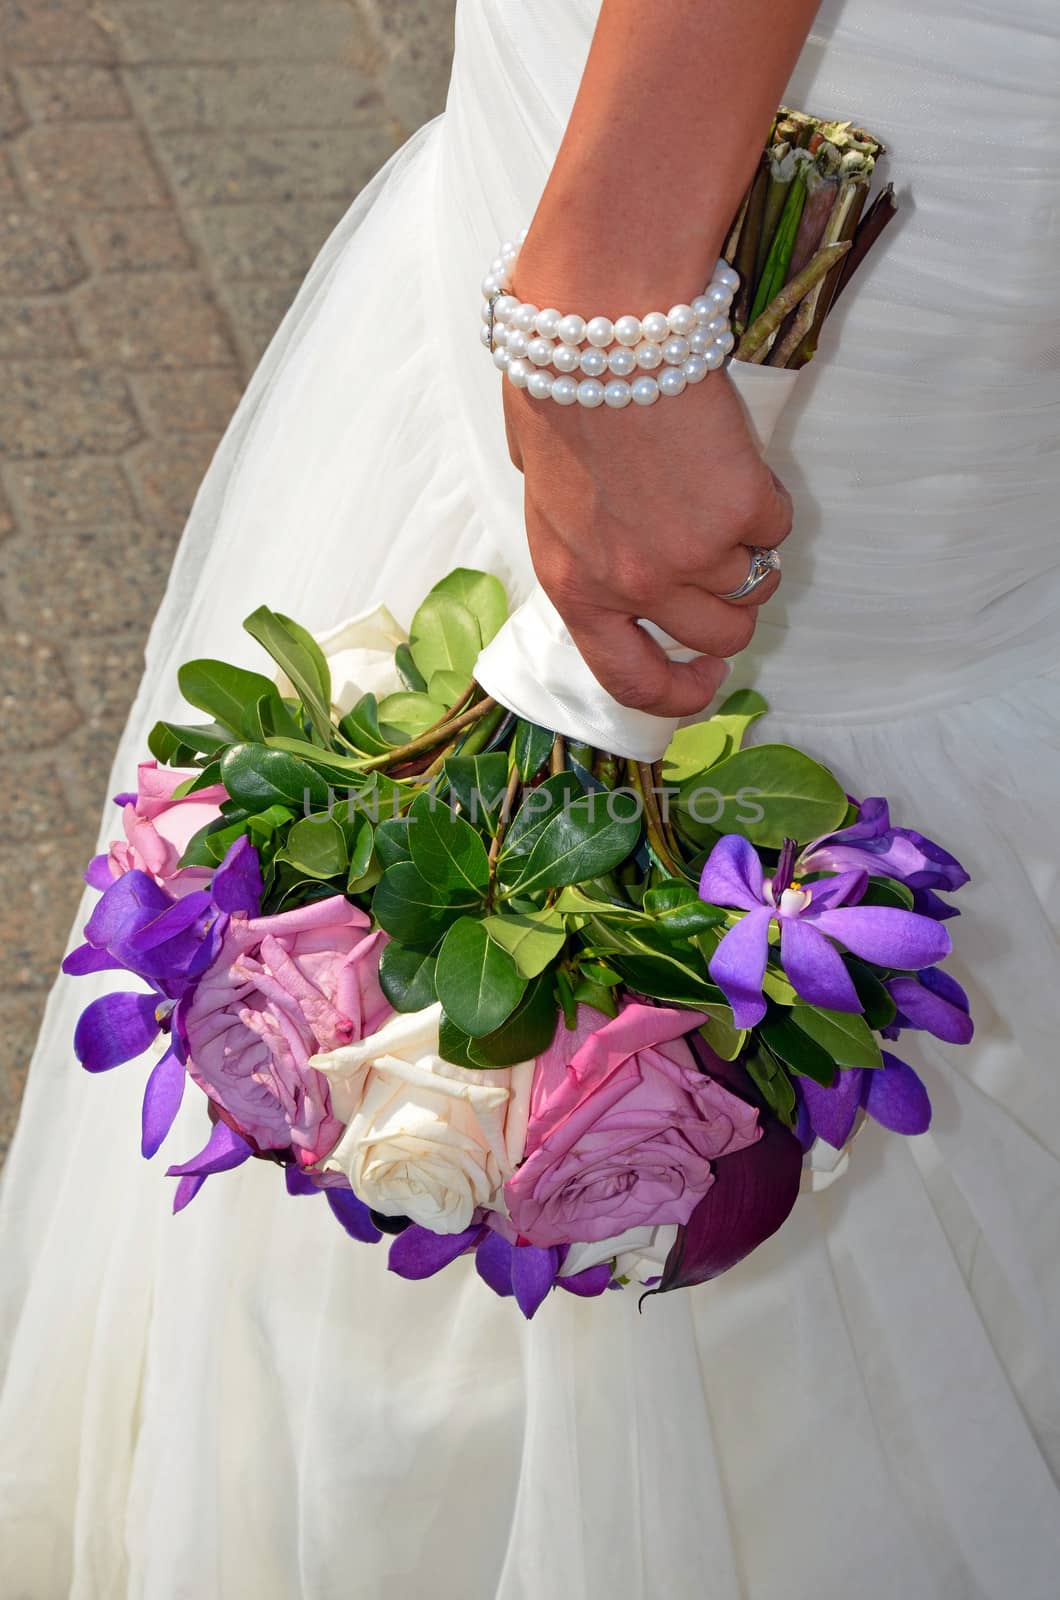 Colorful bridal bouquet by ingperl